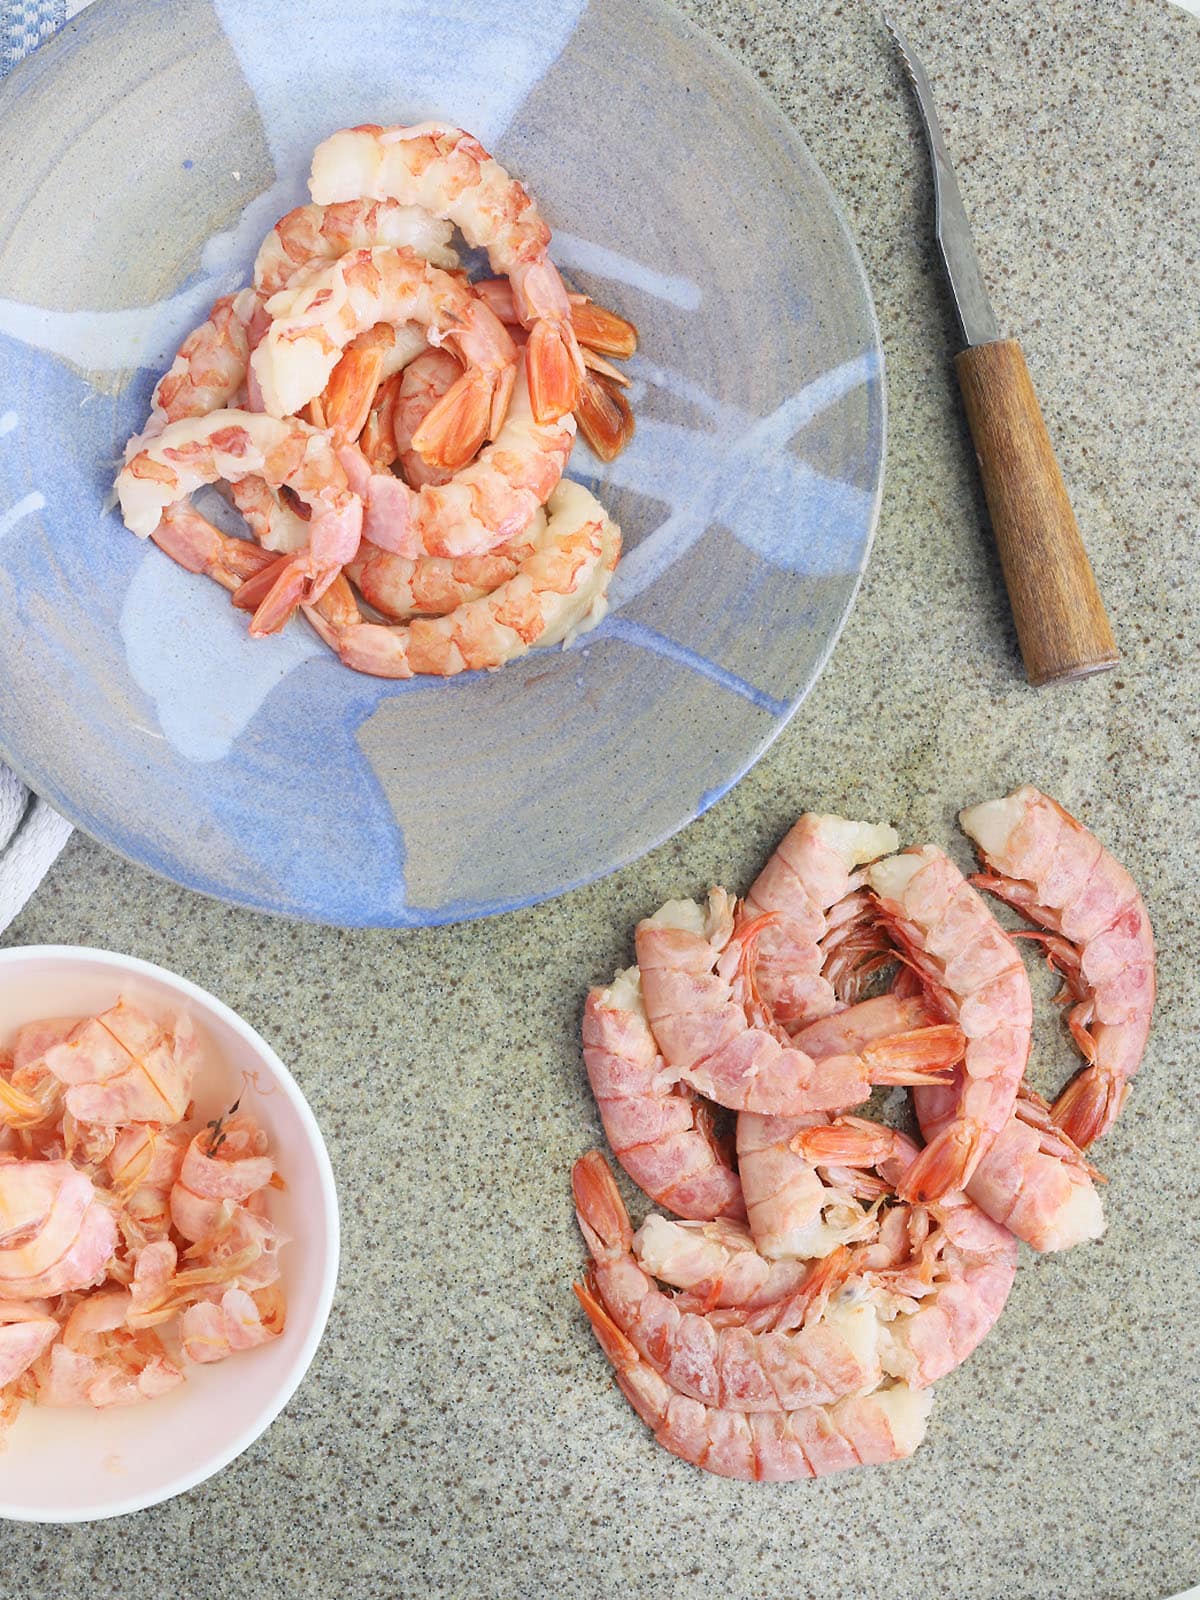 shrimp in the process of being peeled and deveined on al gray stone cutting board